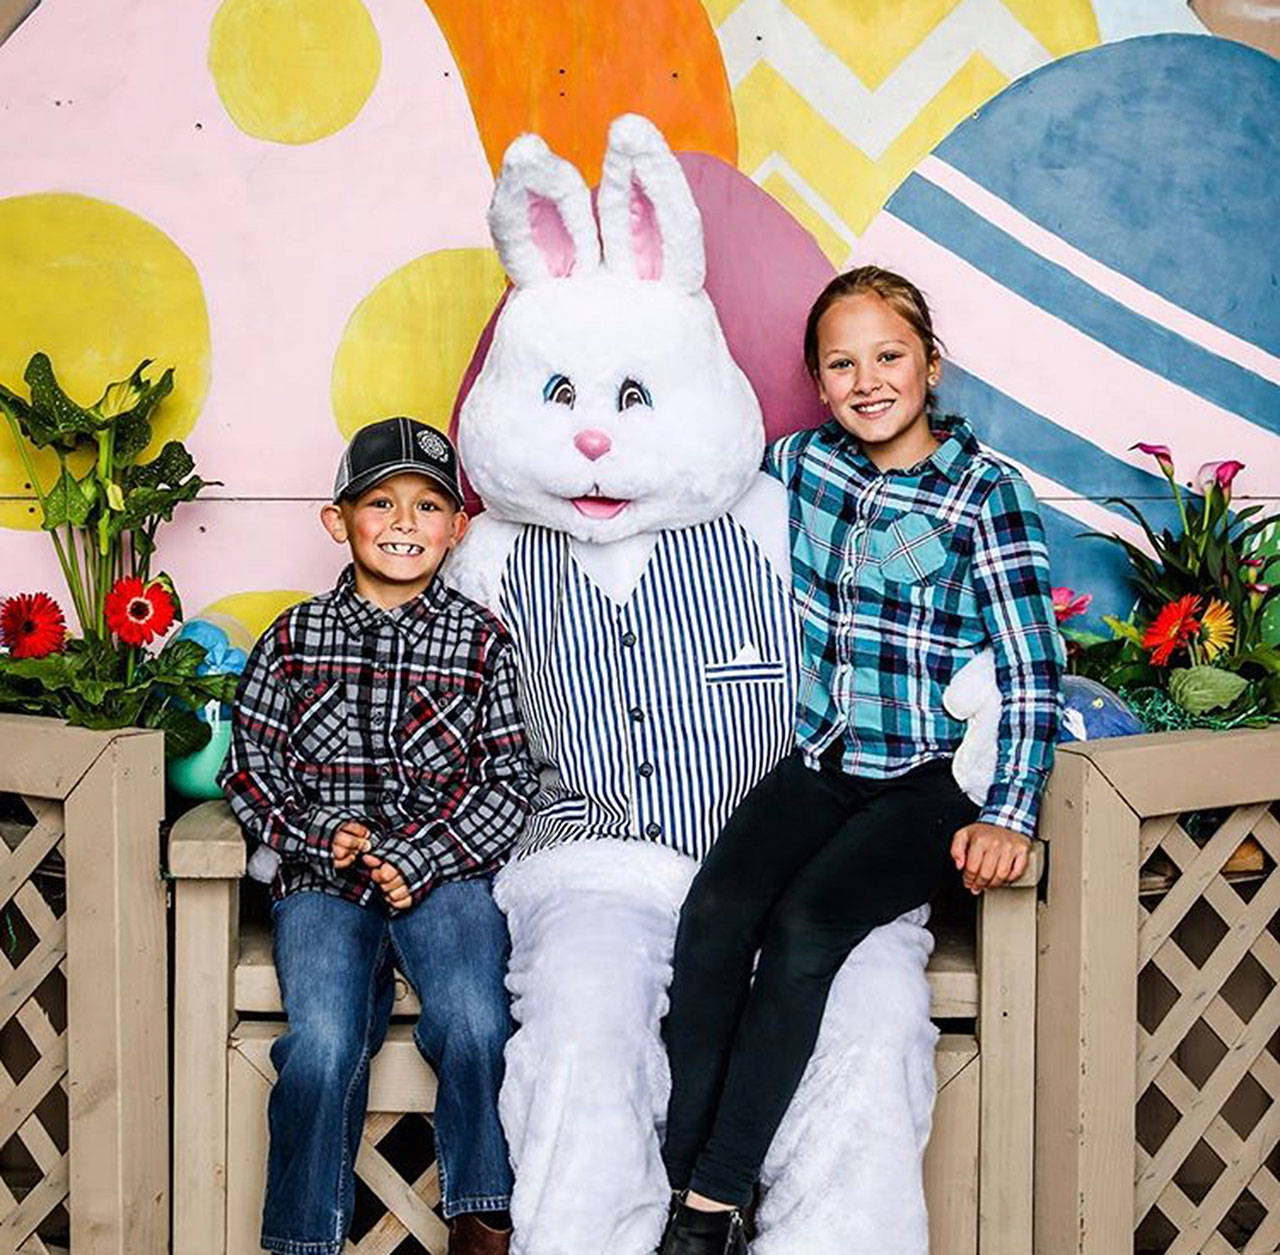 For those who want to get some photos with the Easter Bunny, Thomasson Family Farm is having professional photographer Kailey Wallin come to the Bunny Patch on March 27 and 28 from 9:30 a.m. to 1 p.m. Photo courtesy Thomasson Family Farm